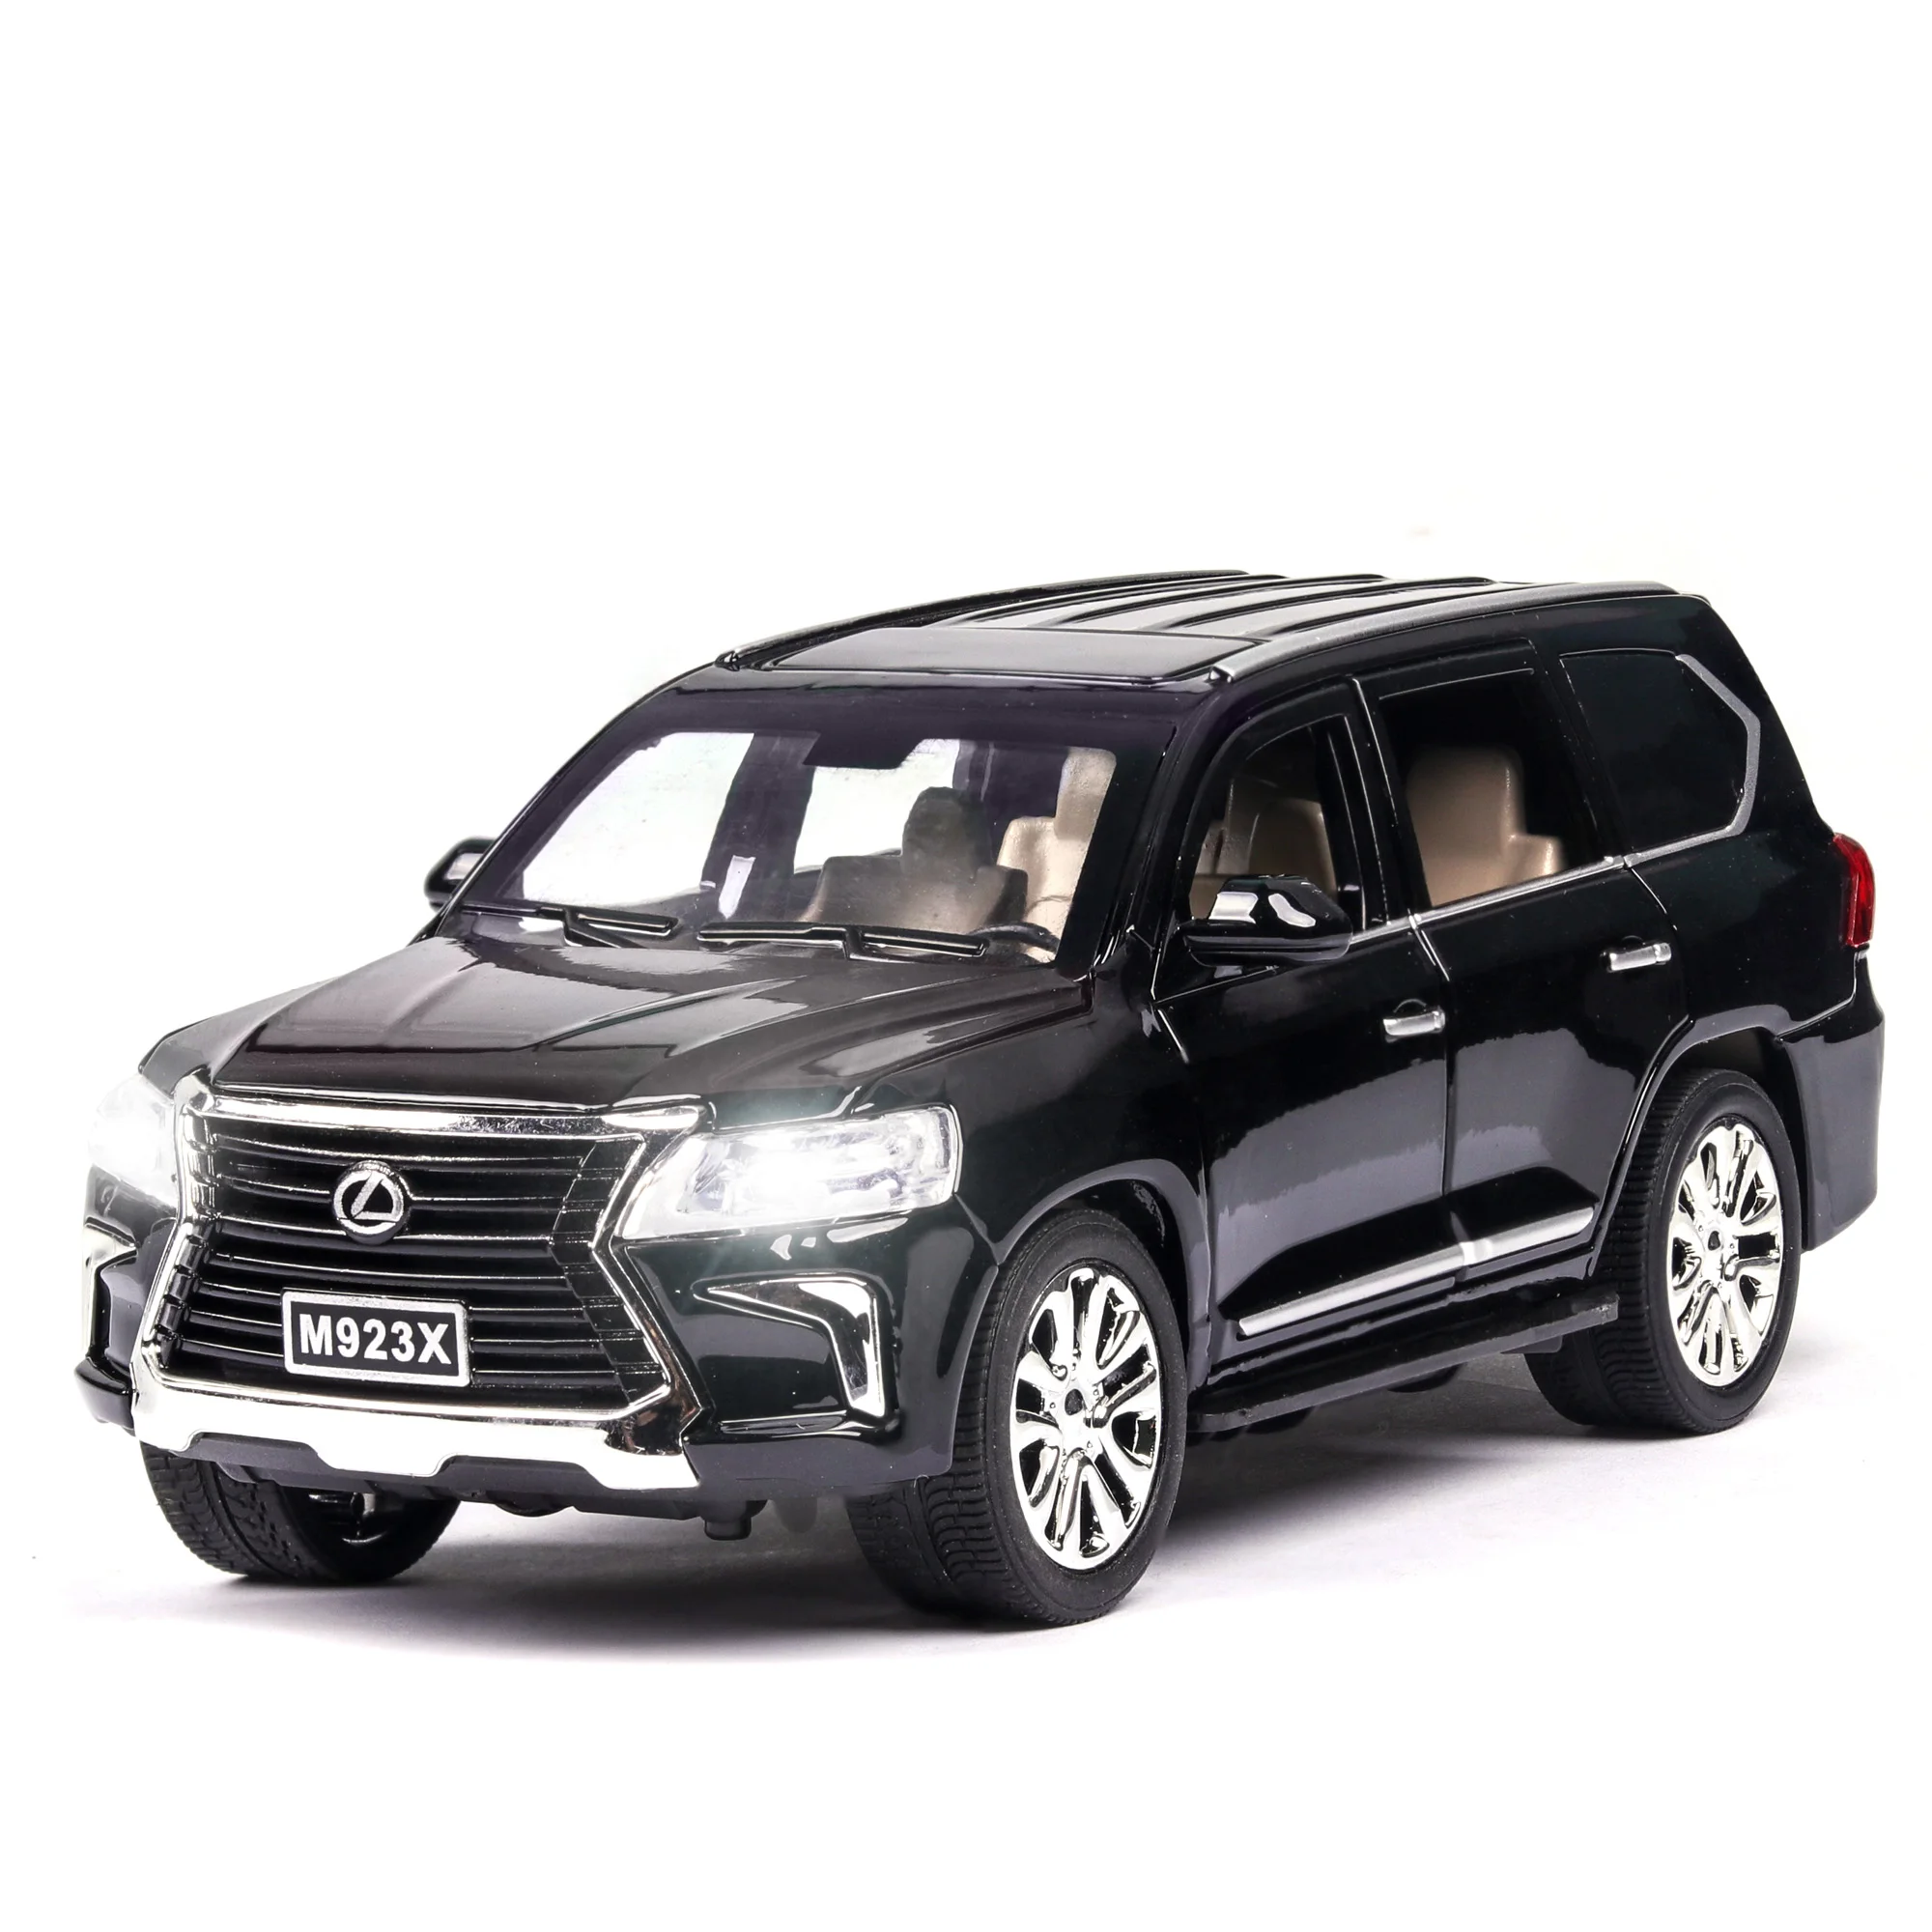 Details about   1:32 Diecast Alloy Sound&Light Pull Back Car Model Toy Gift For Lexus LX570 SUV 